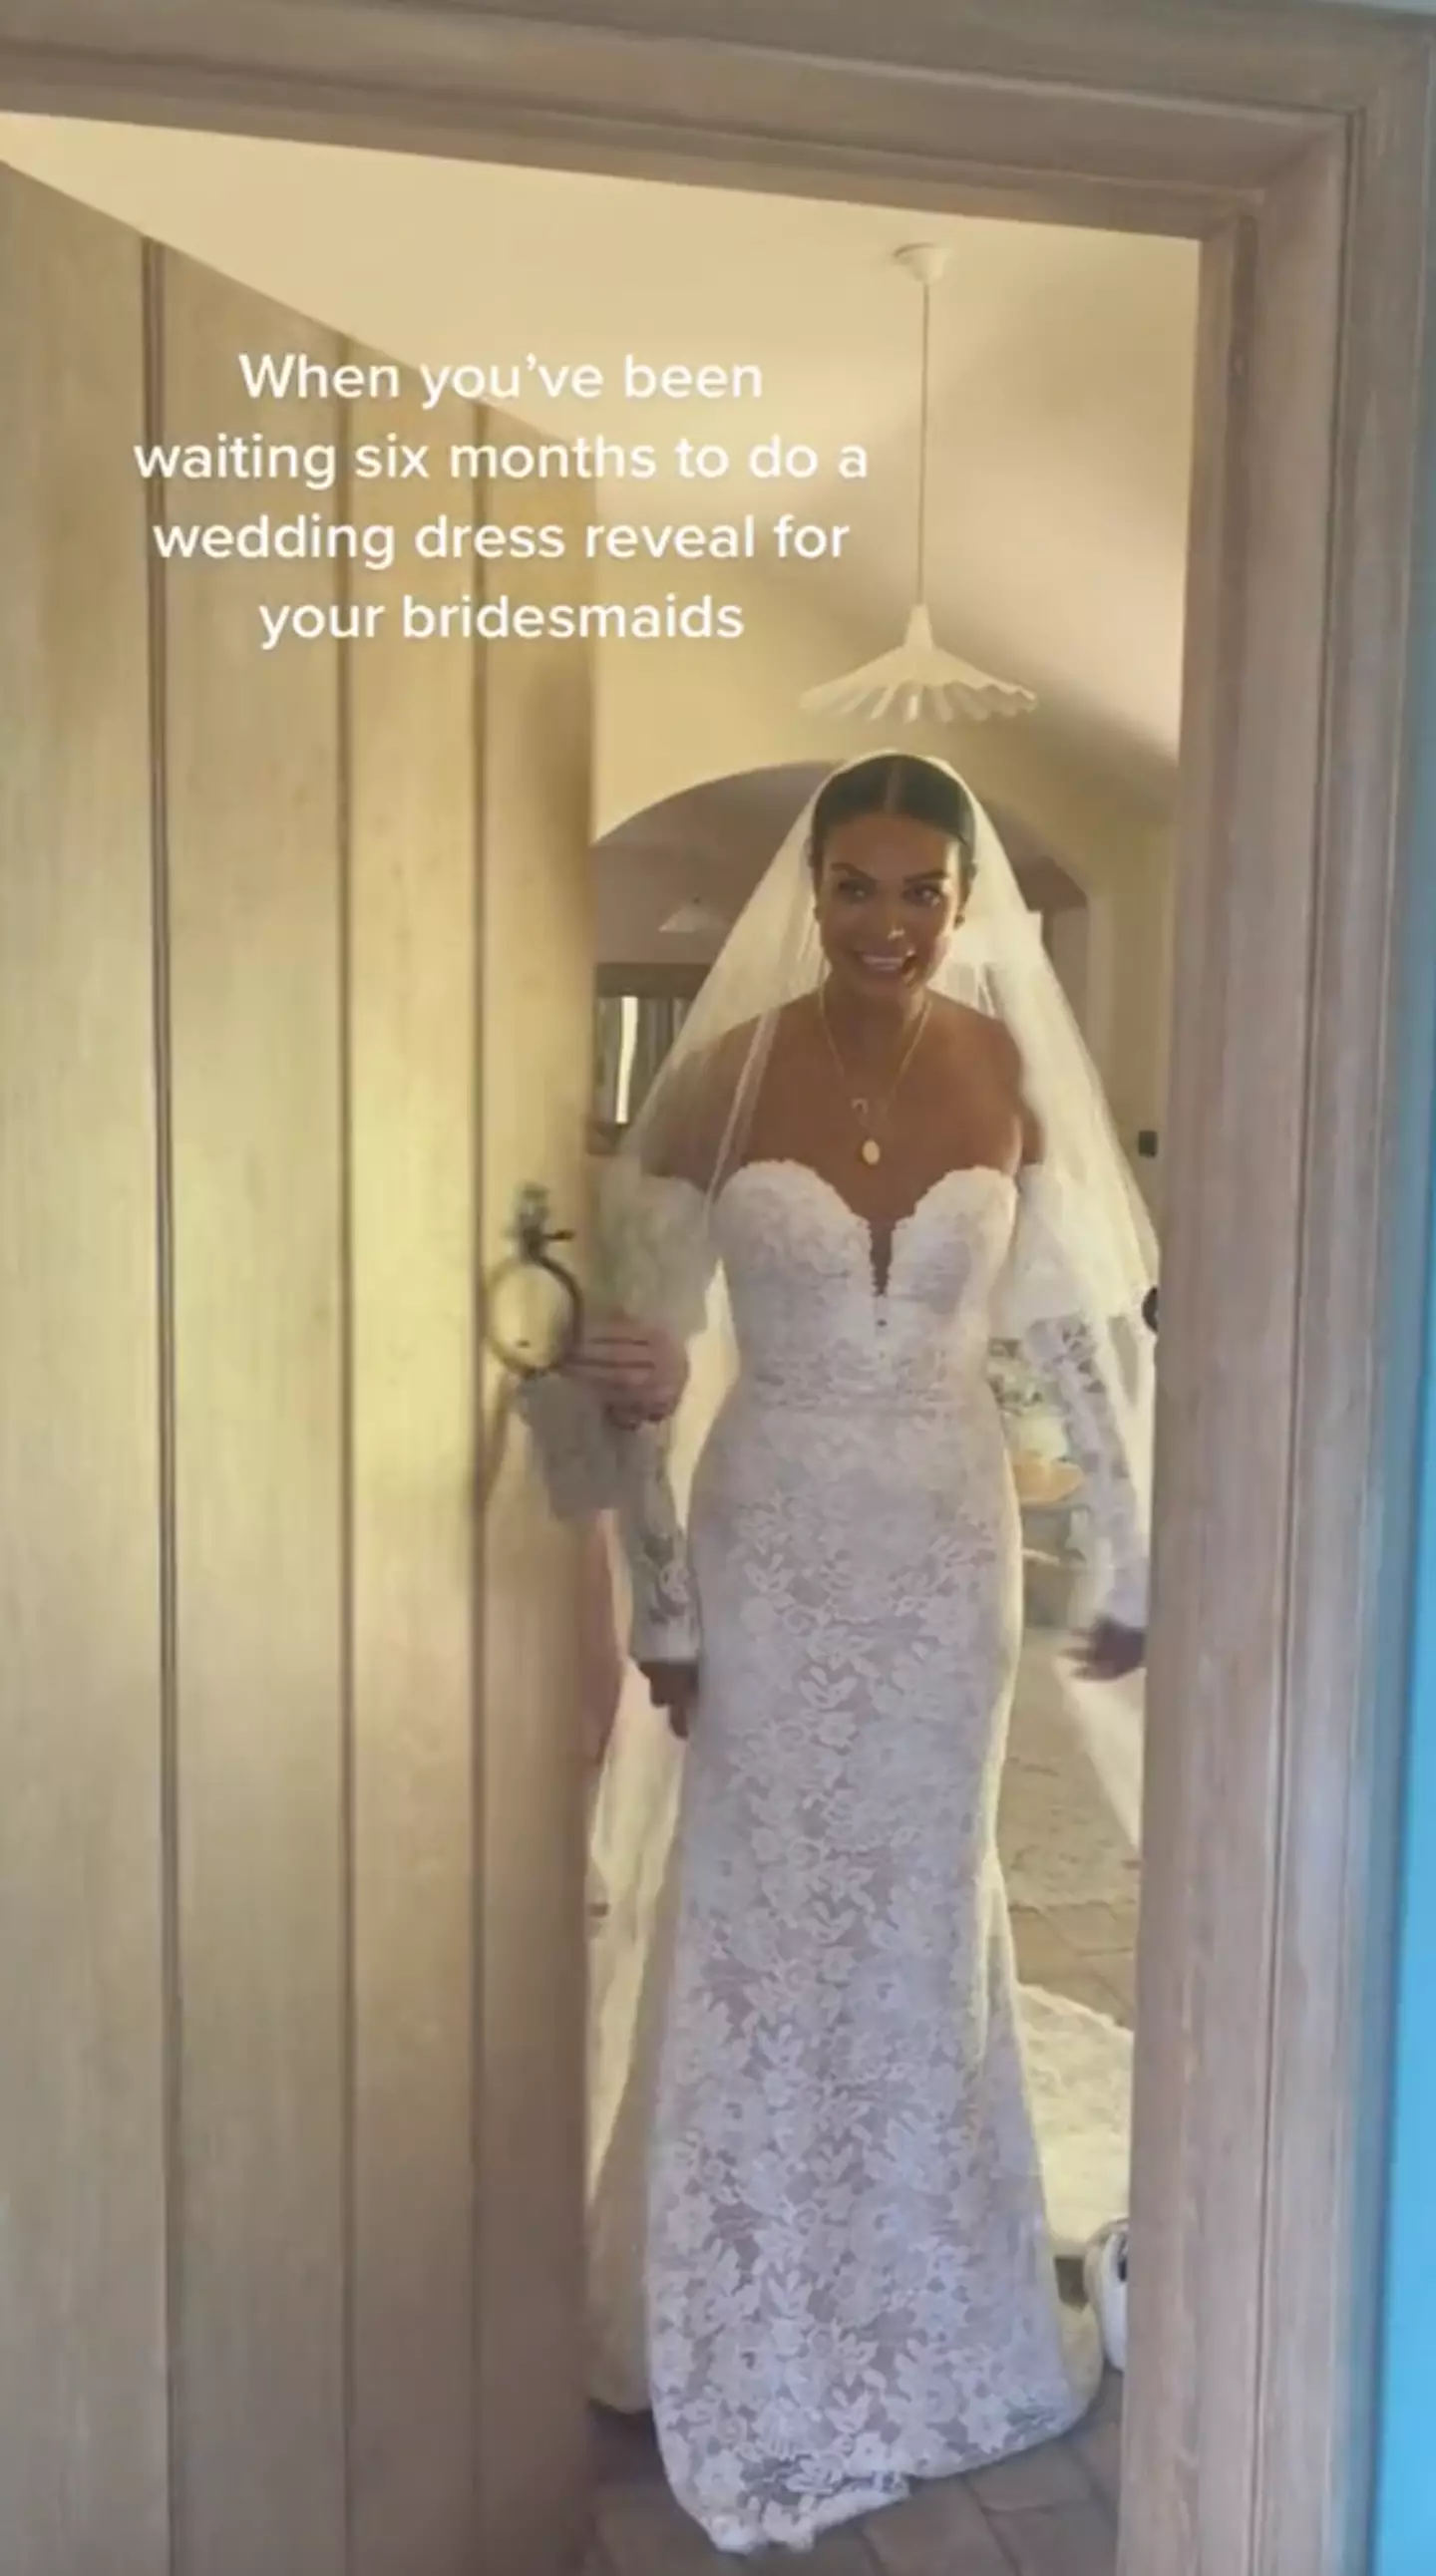 One bride was left shocked after her mum 'ruined' her wedding dress reveal.